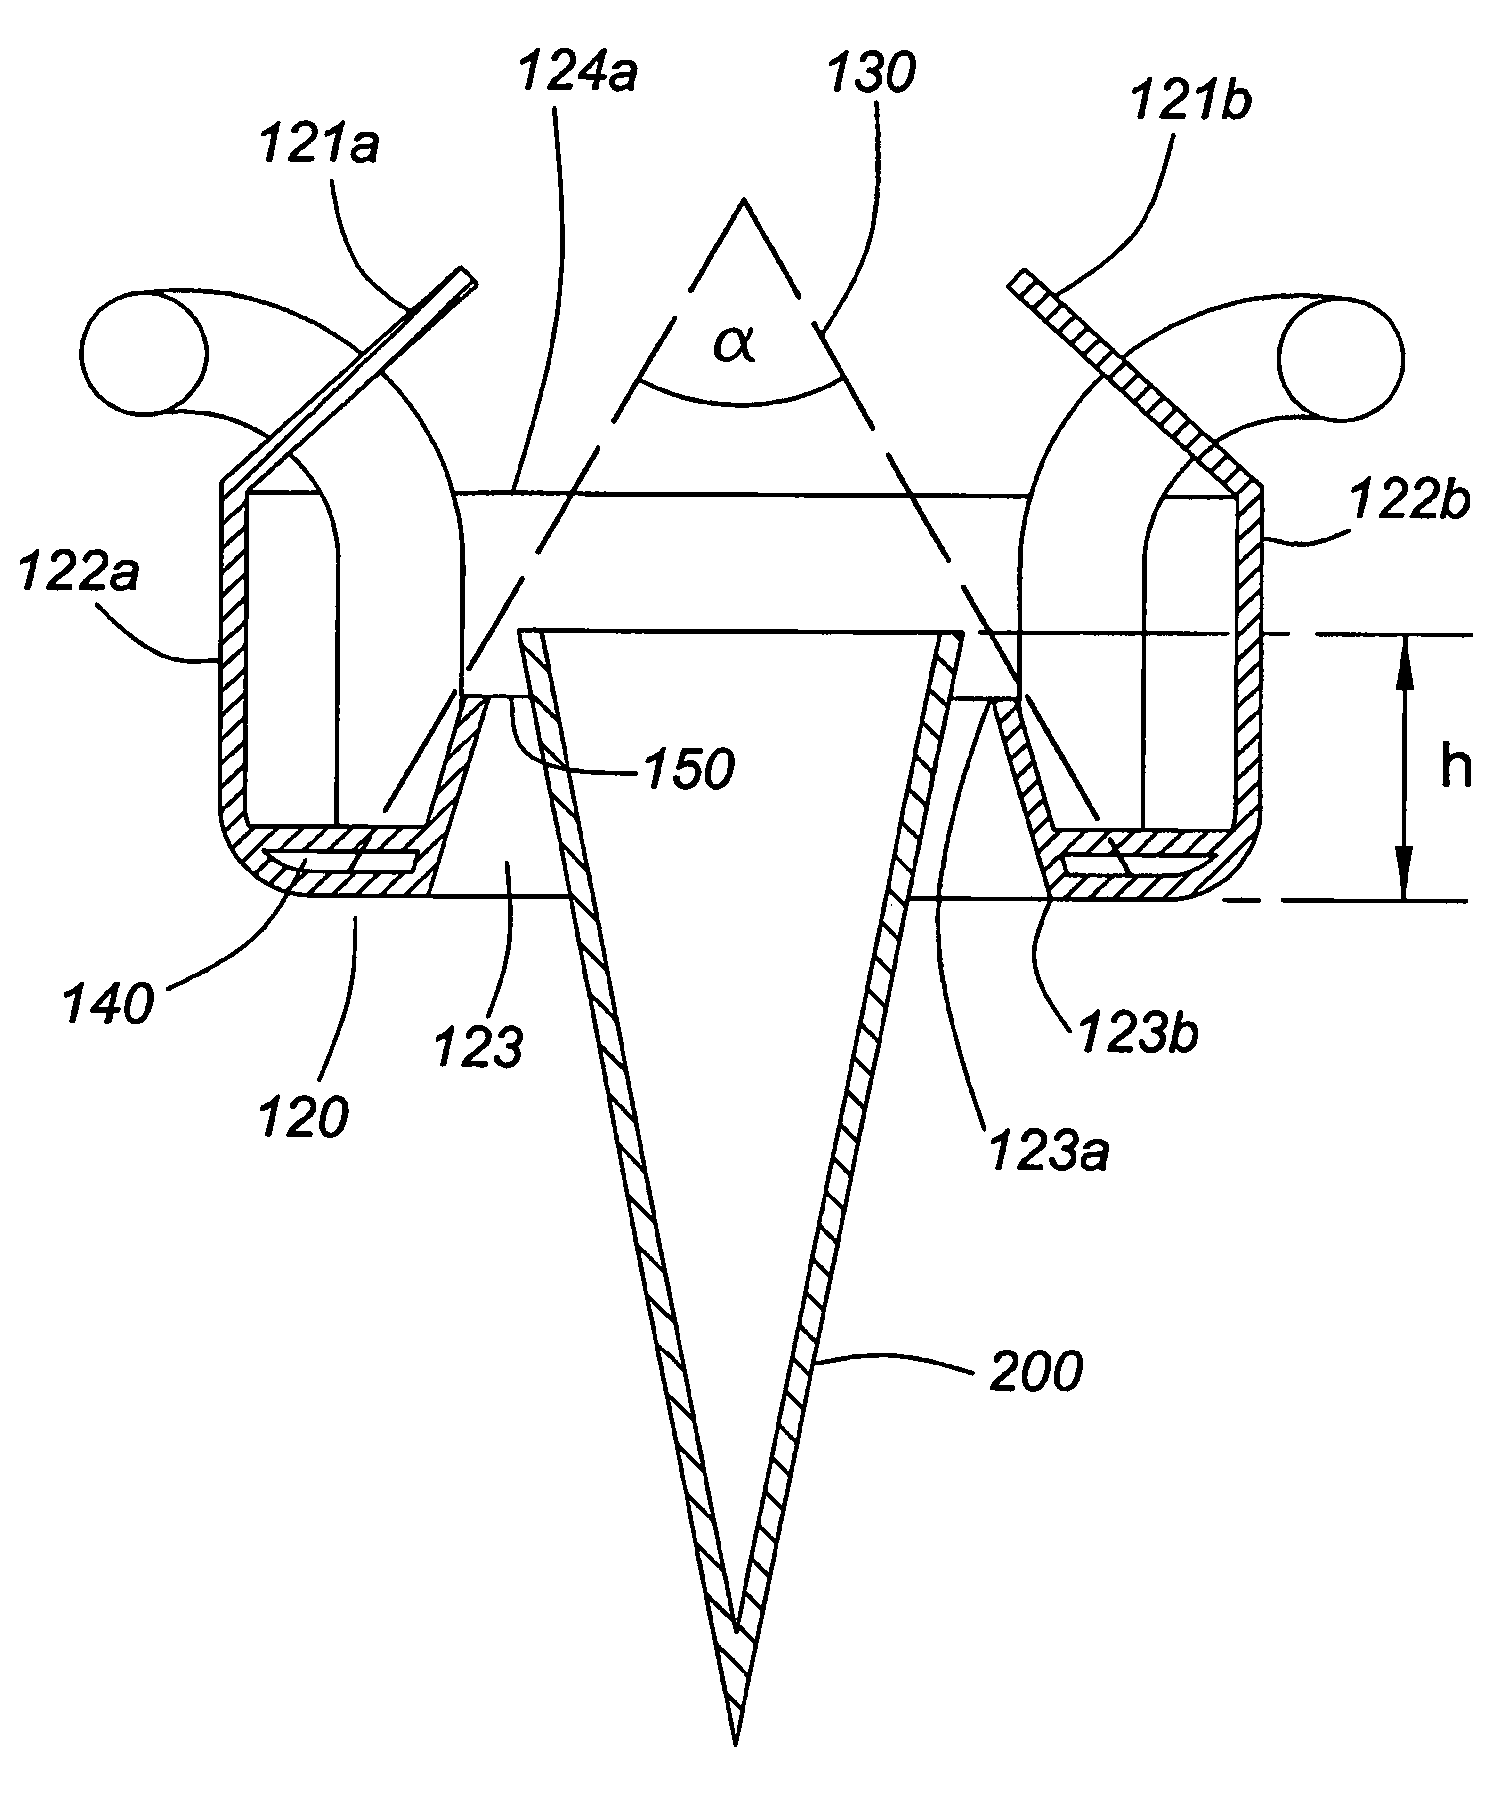 Method, apparatus, and system for coating food items